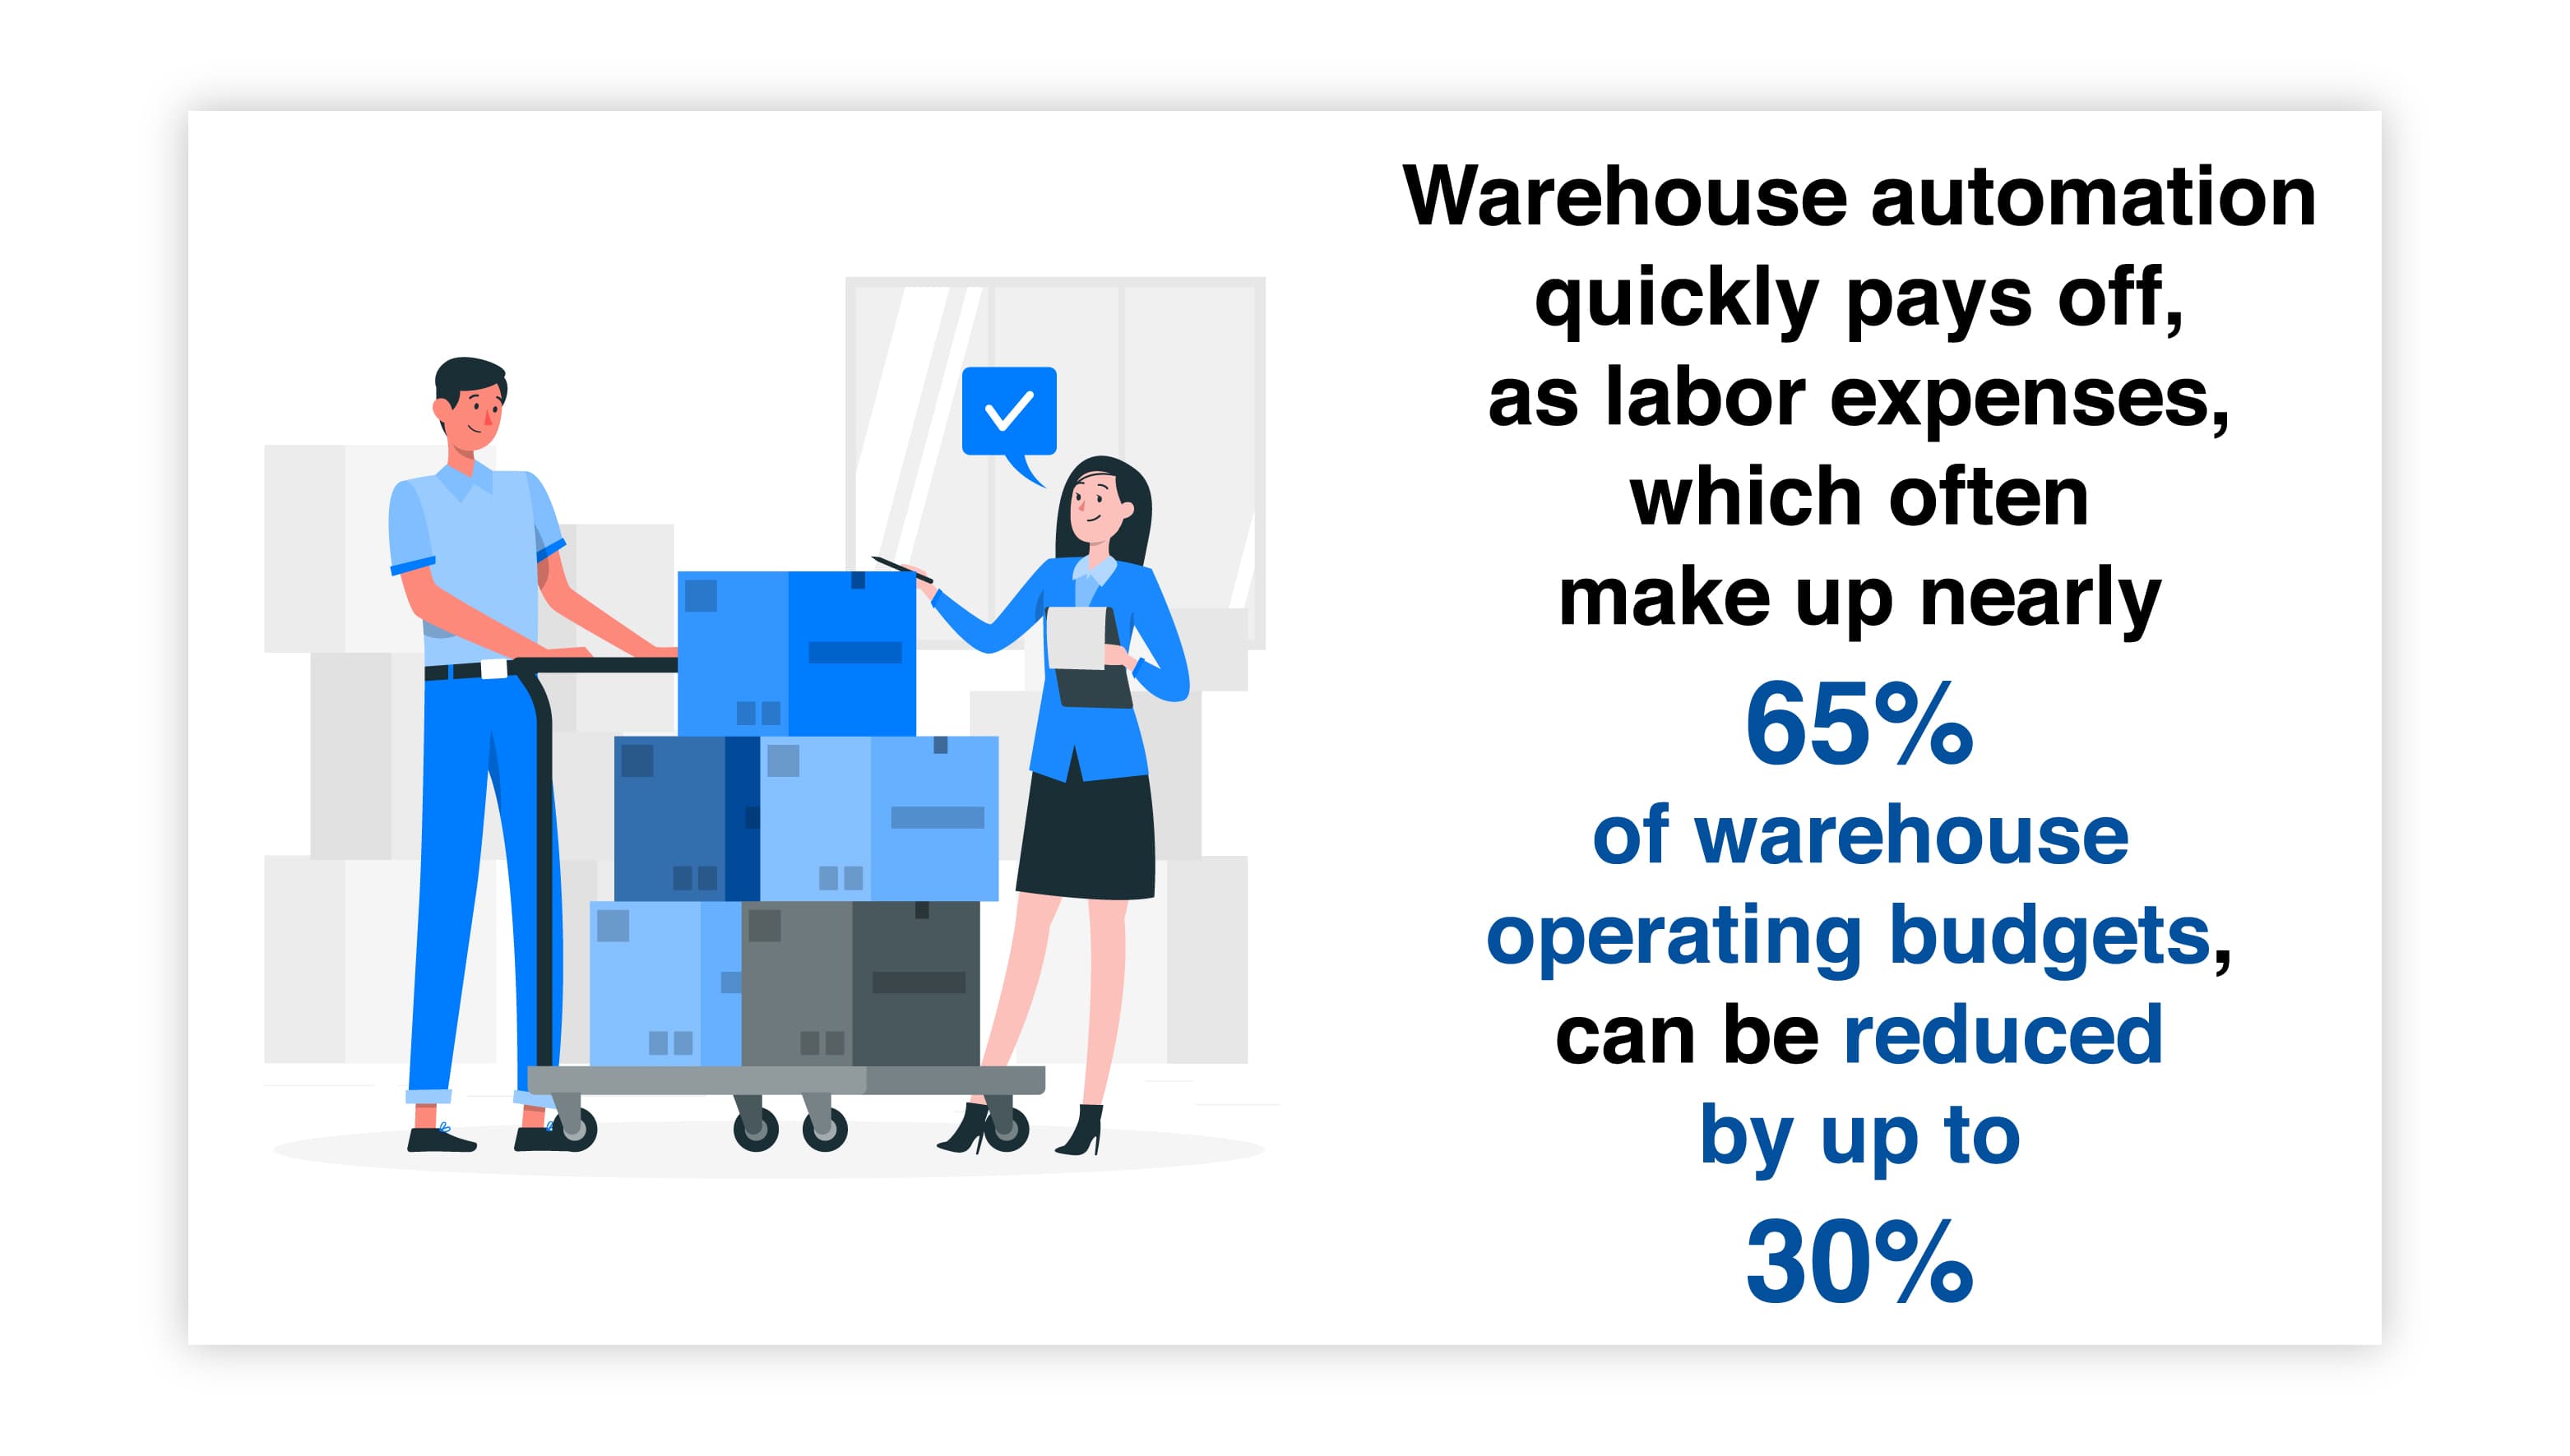 5 Warehouse automation quickly pays off